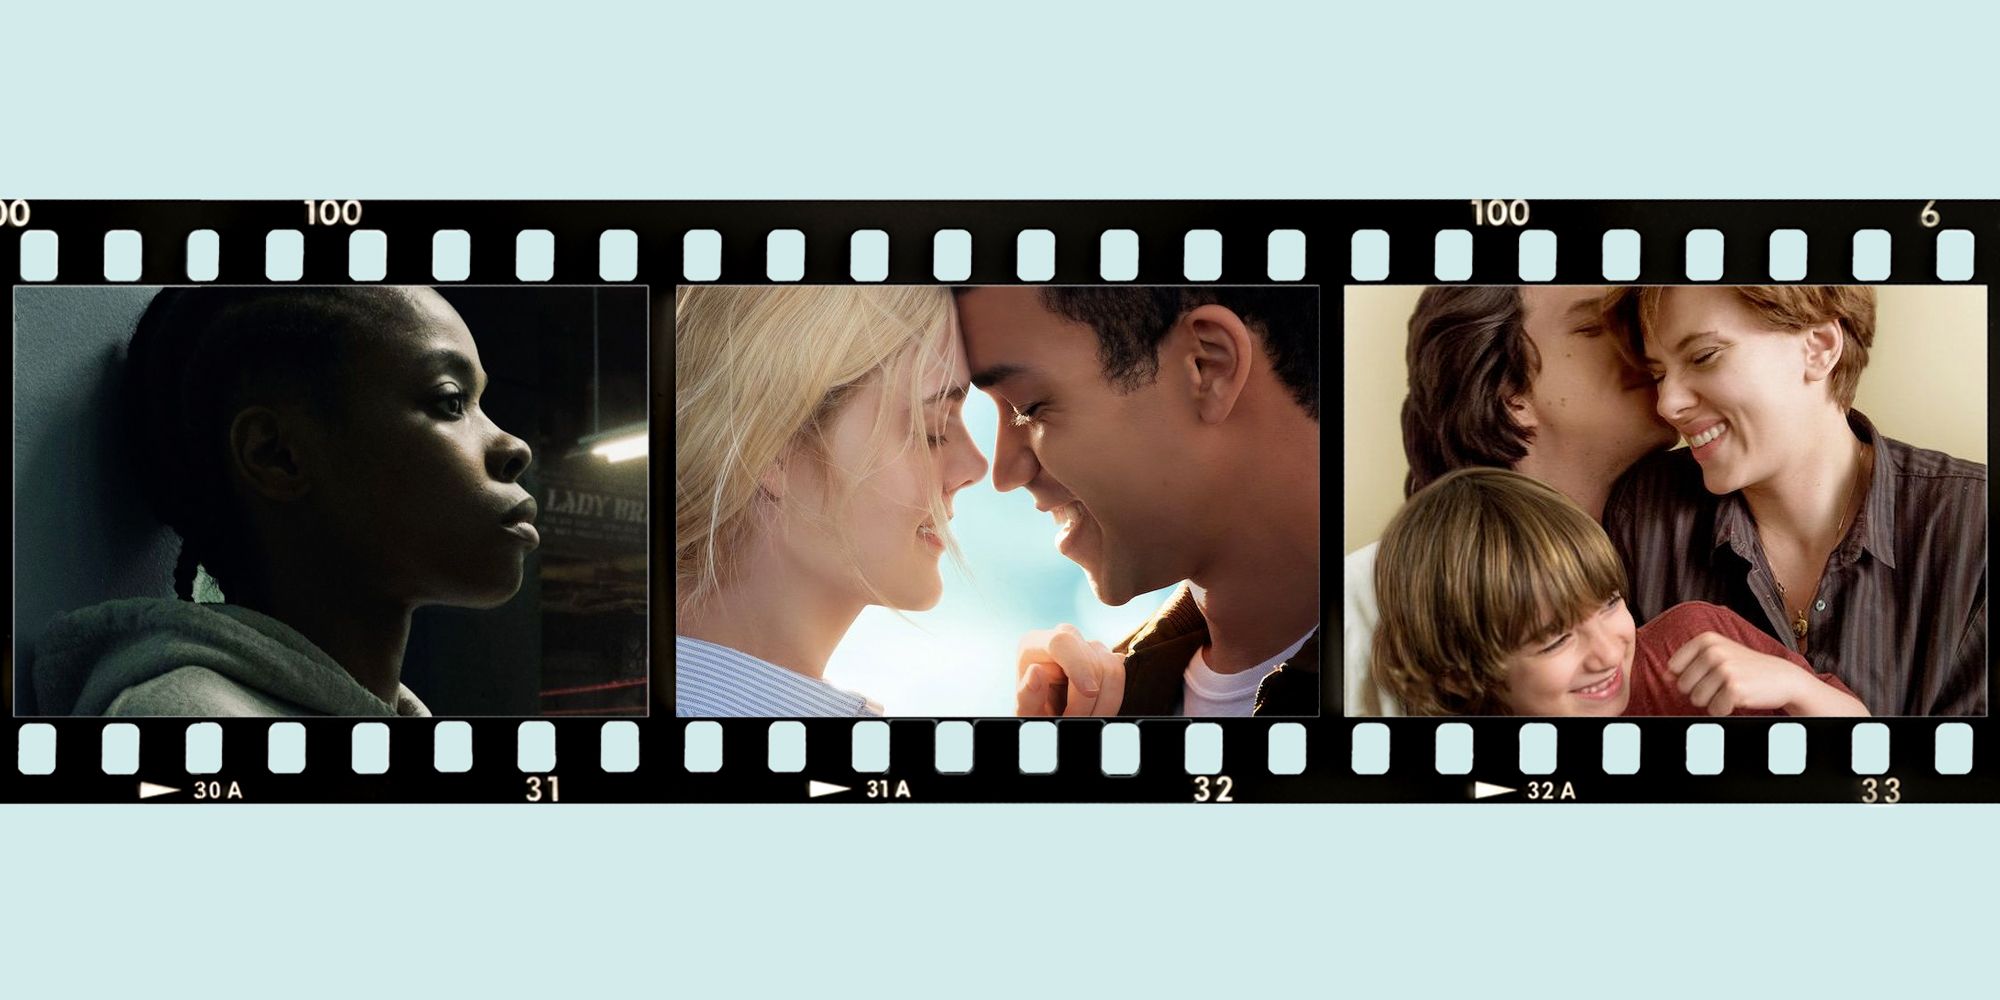 10 Best Sad Romance Movies to Watch When You Just Need to Feel Something -  Netflix Tudum